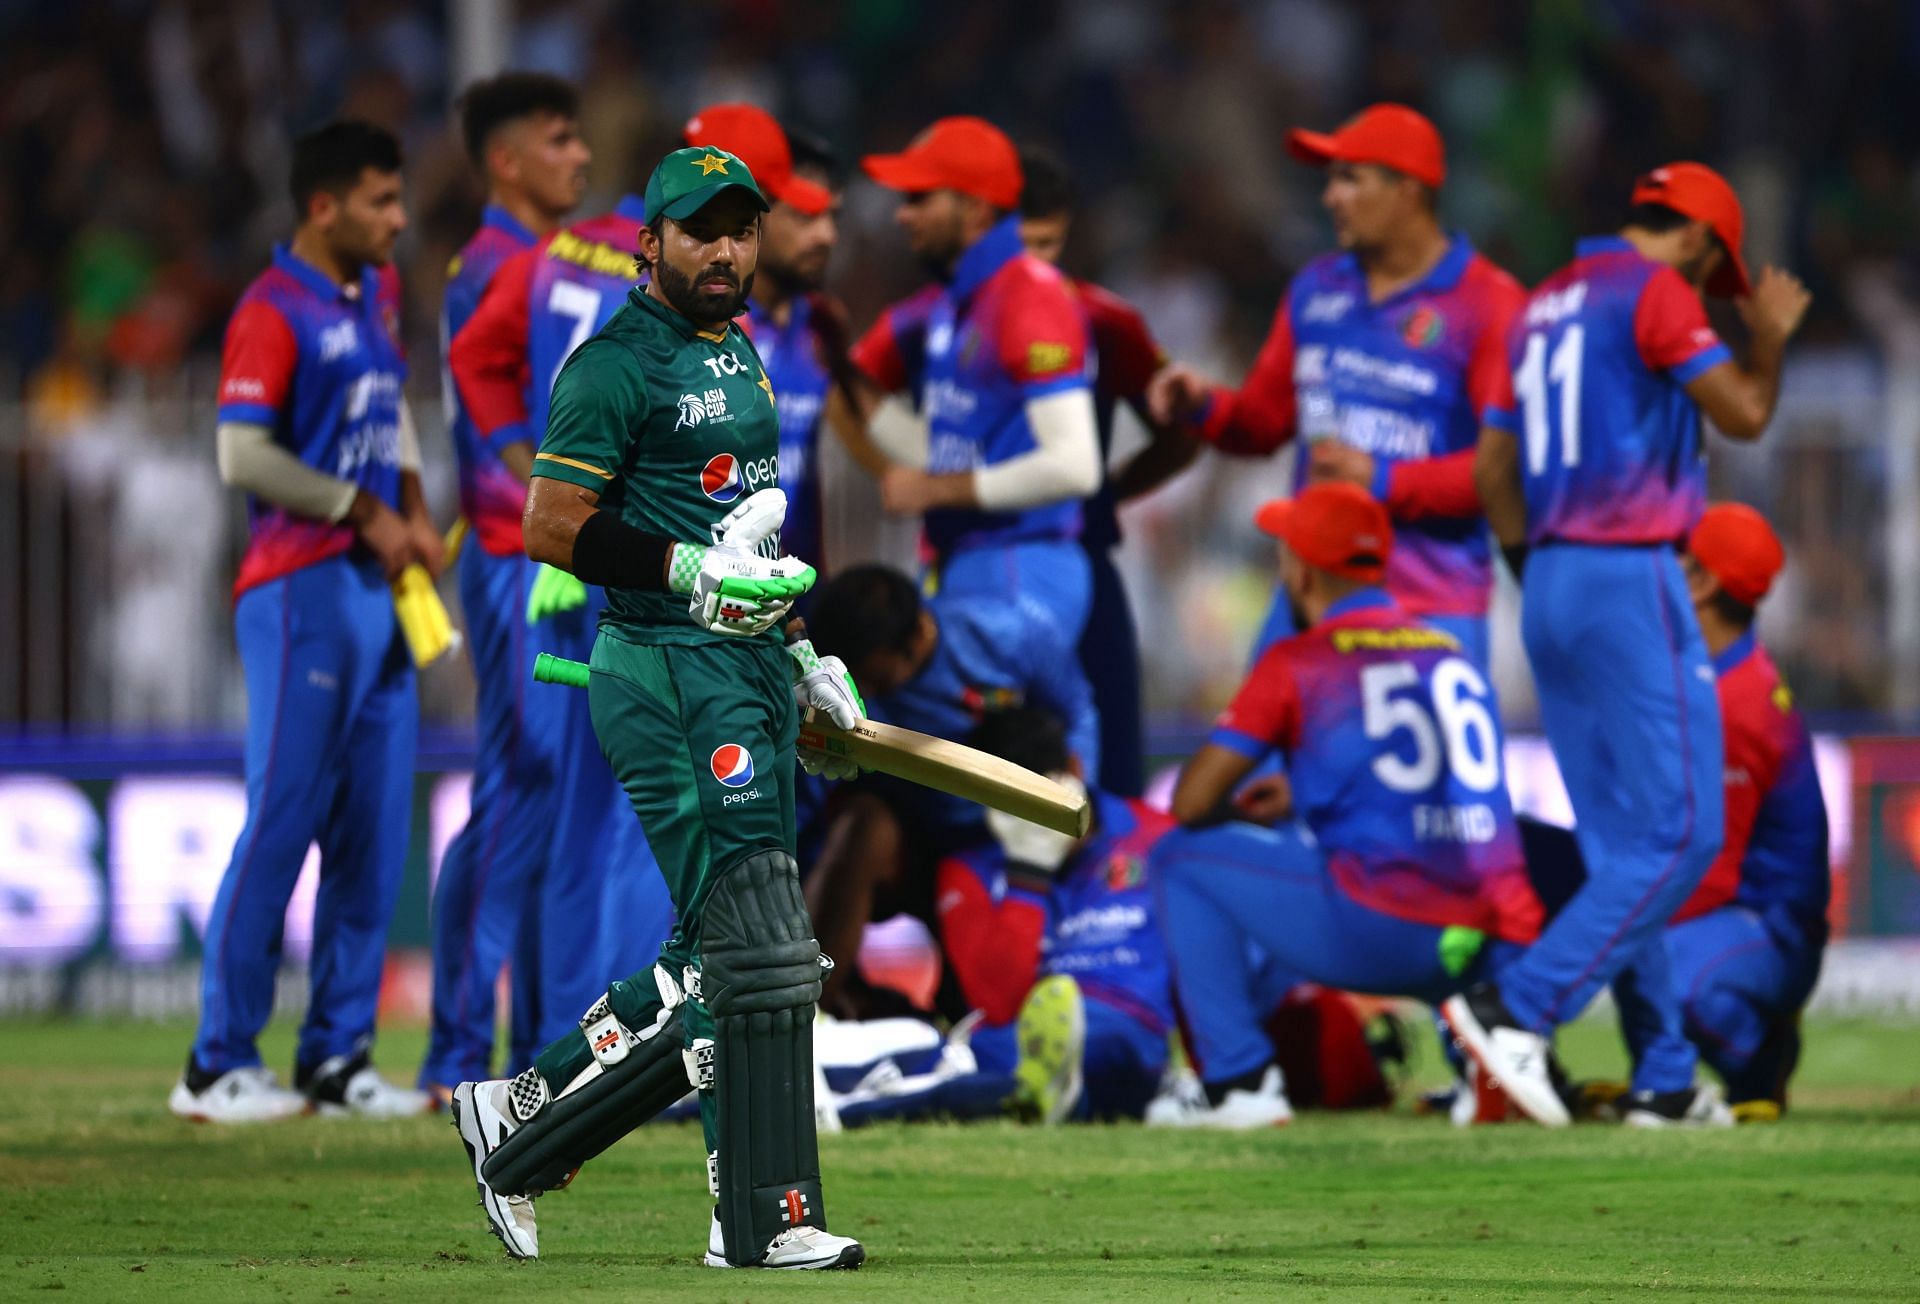 Afghanistan rarely plays against the top teams.